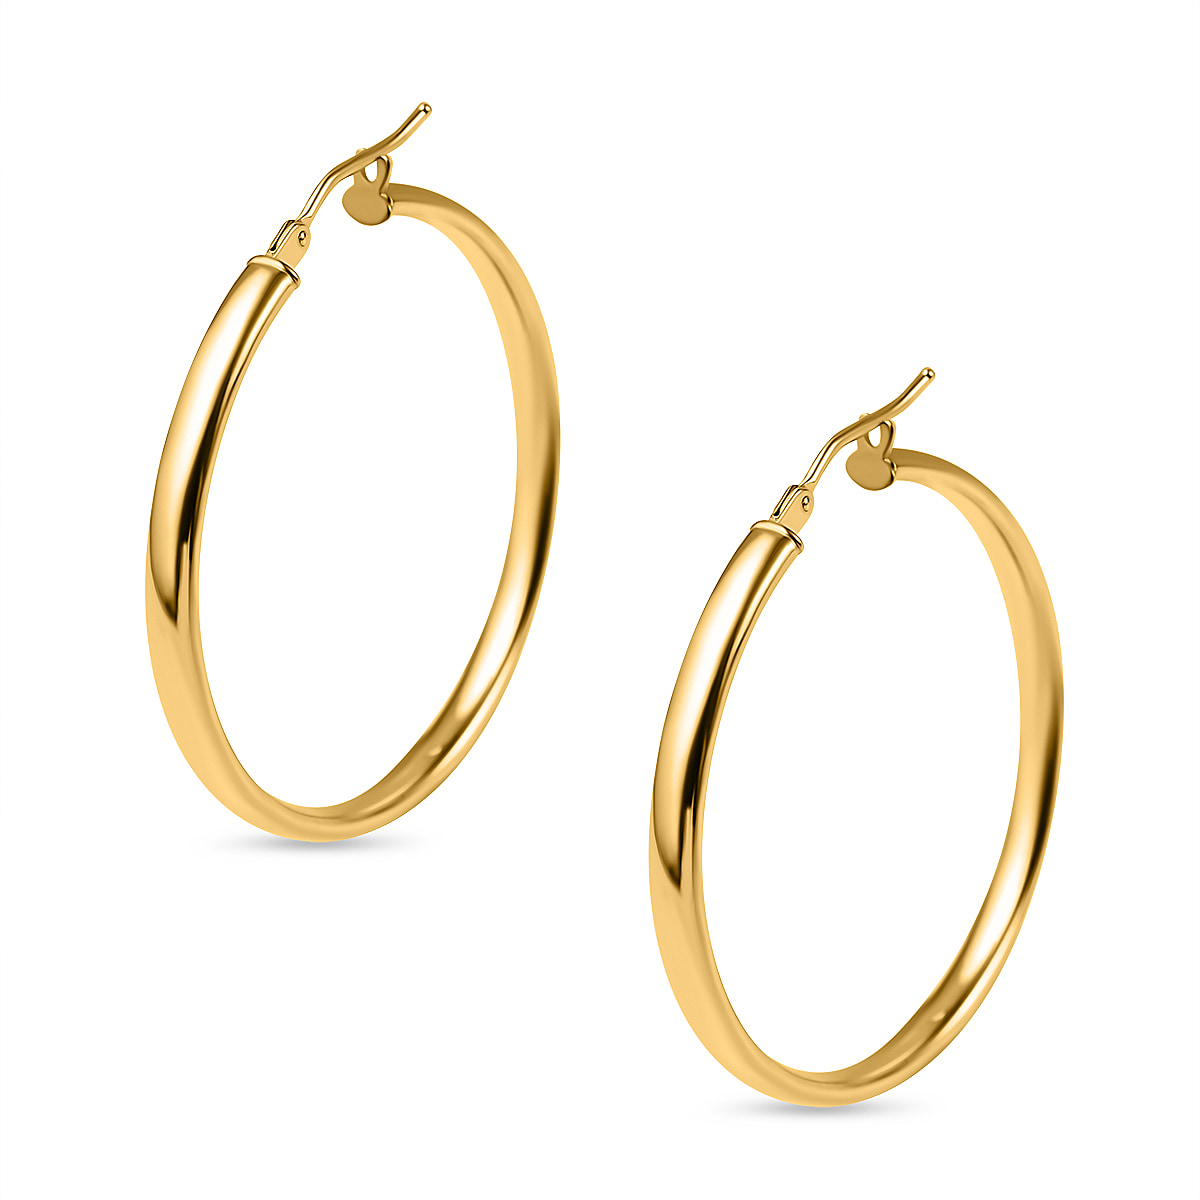 Maestro Collection - 9K Yellow Gold Hoop Earrings